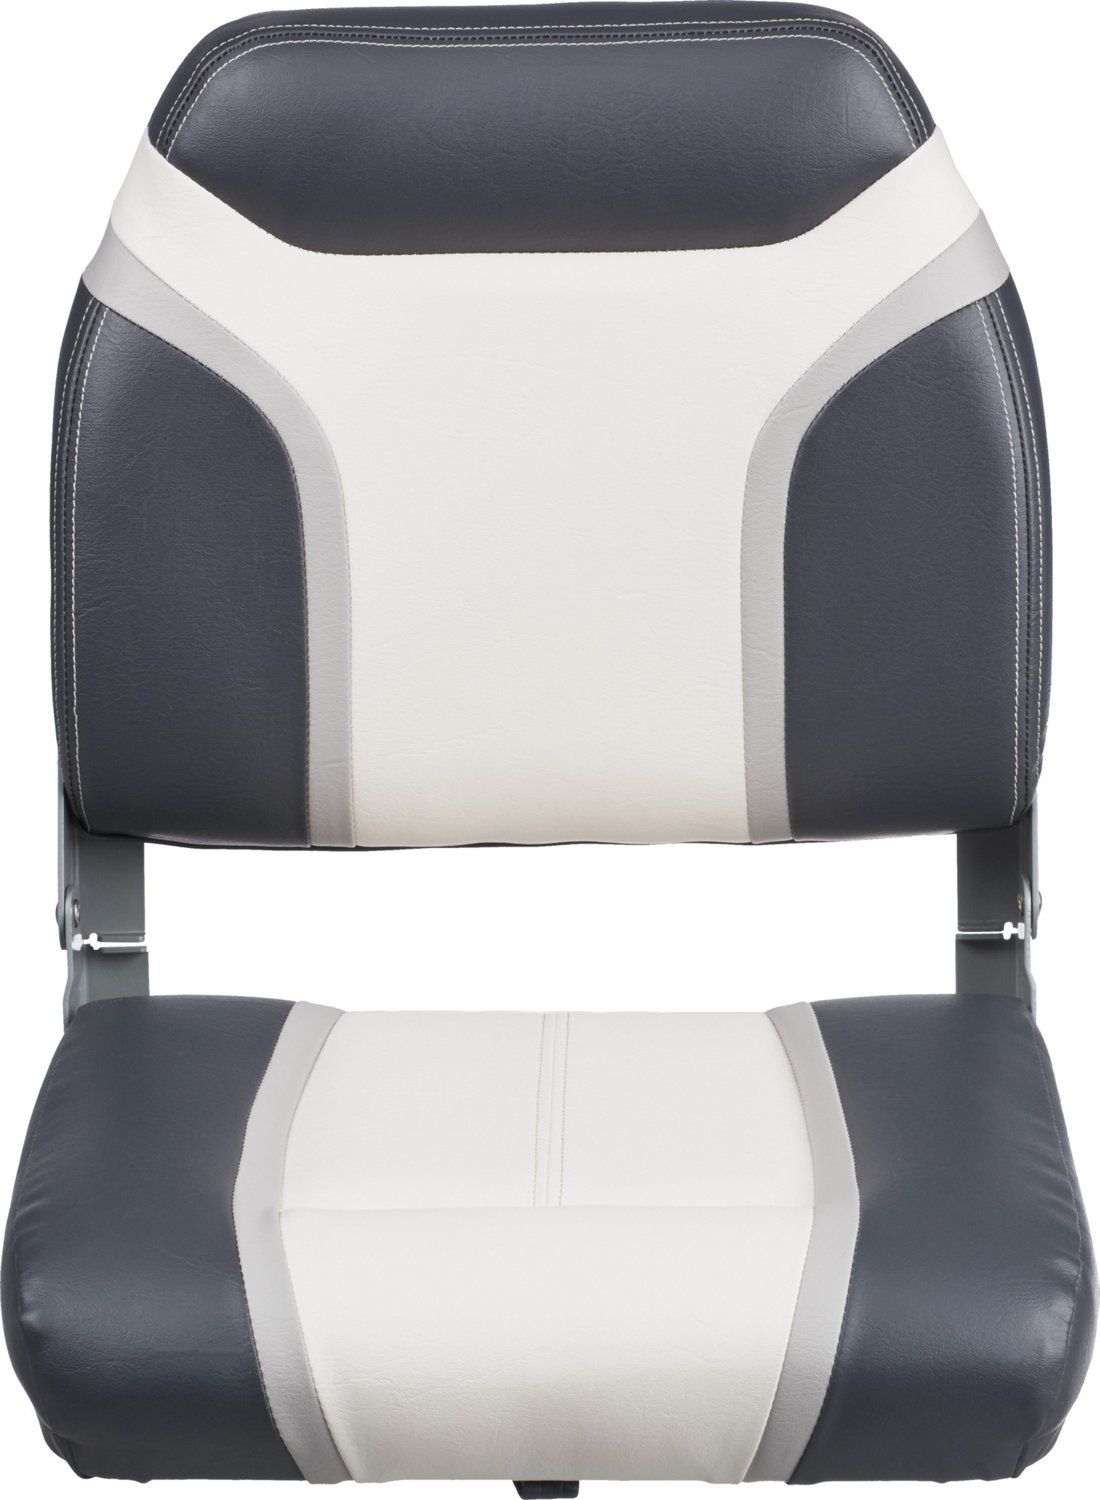 Boat Seats Pro Casting Deck Seat Captains Bucket Boat Seat Seat  Swivel-White+Blue+Star